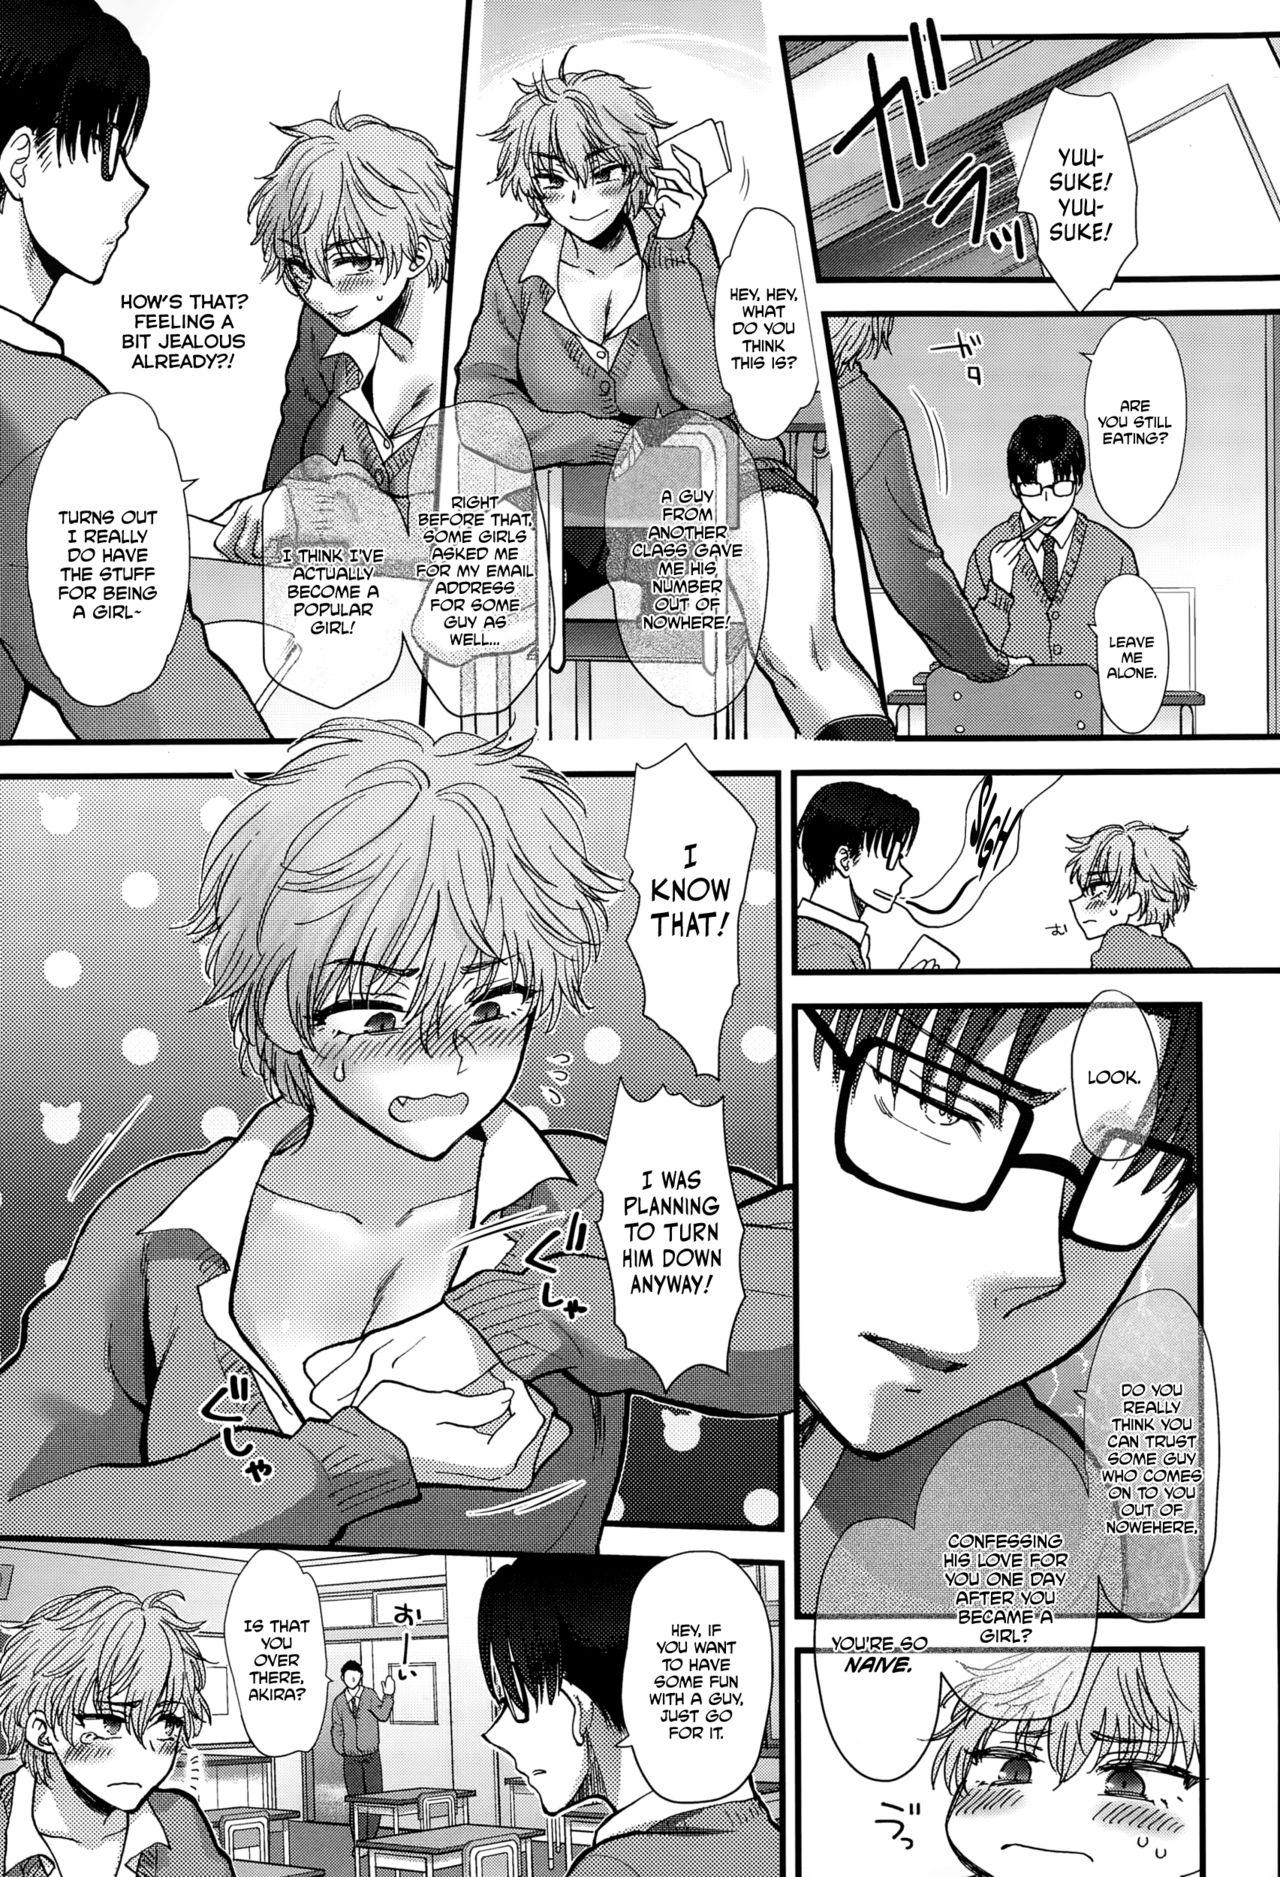 Small Tits Shinyuu Affection - Best Friend Affection Clitoris - Page 5